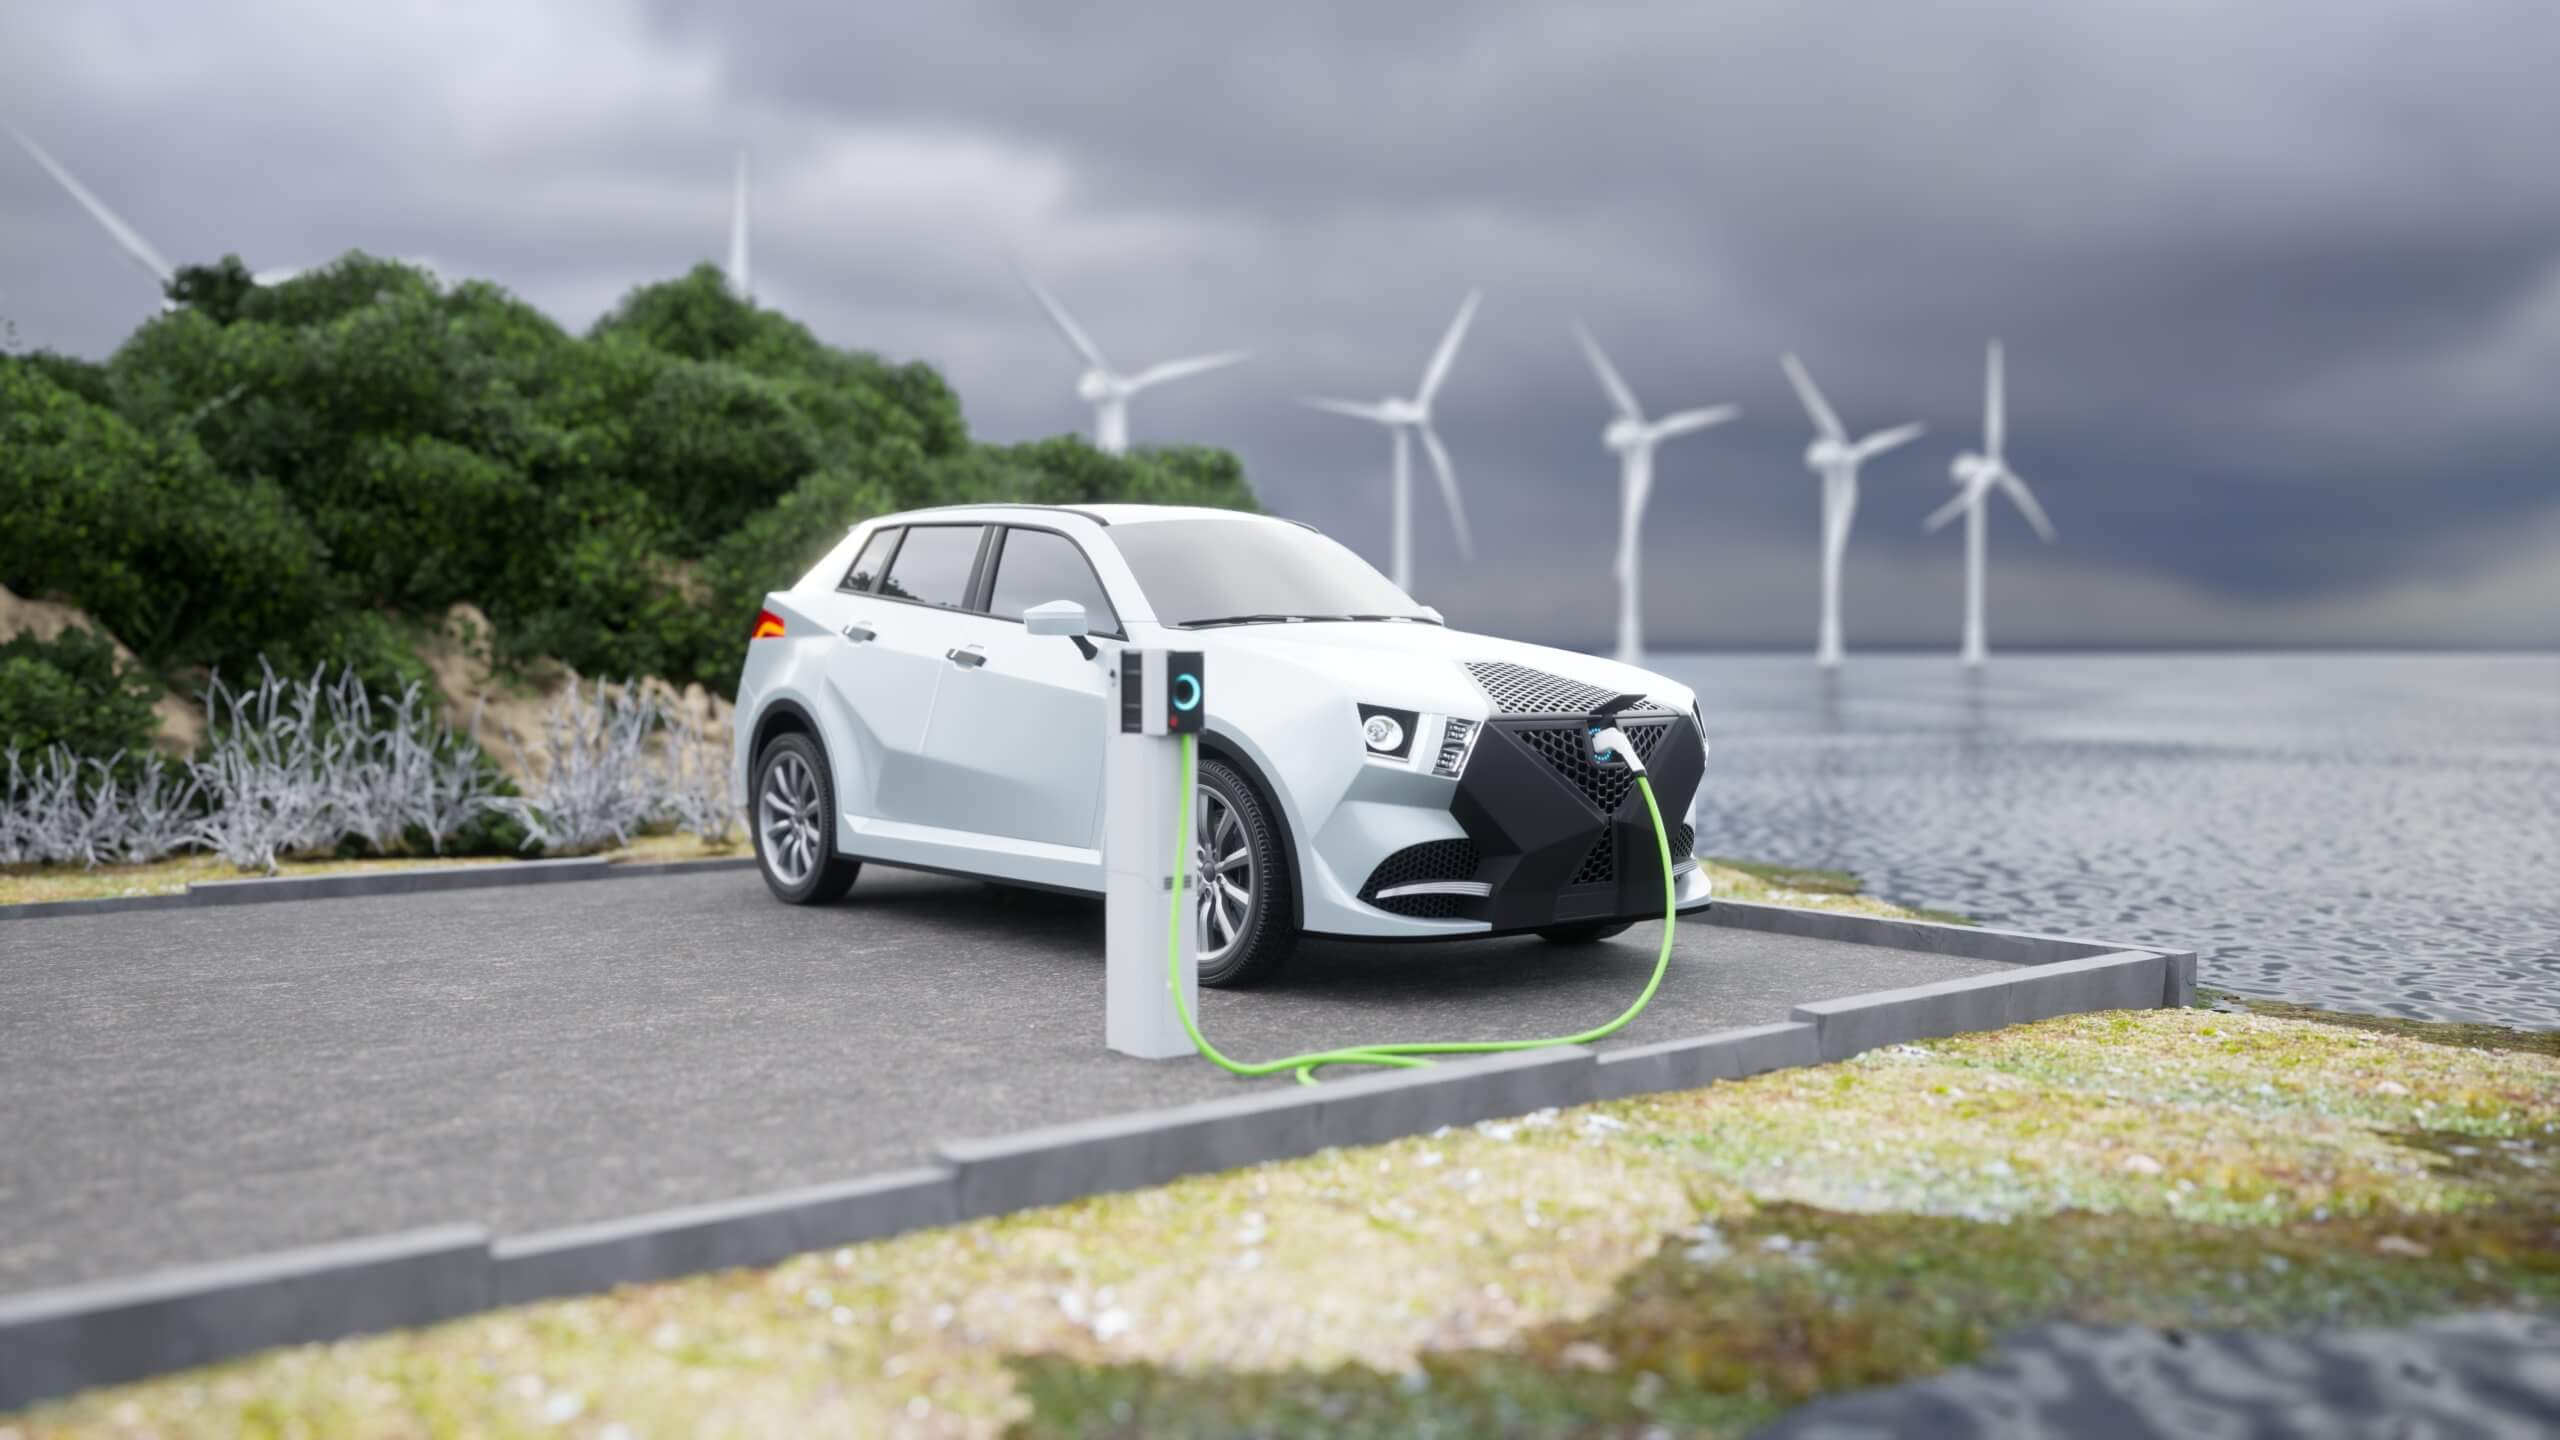 Electric vehicle plugged into a charging station by a body of water with windmills in the background.